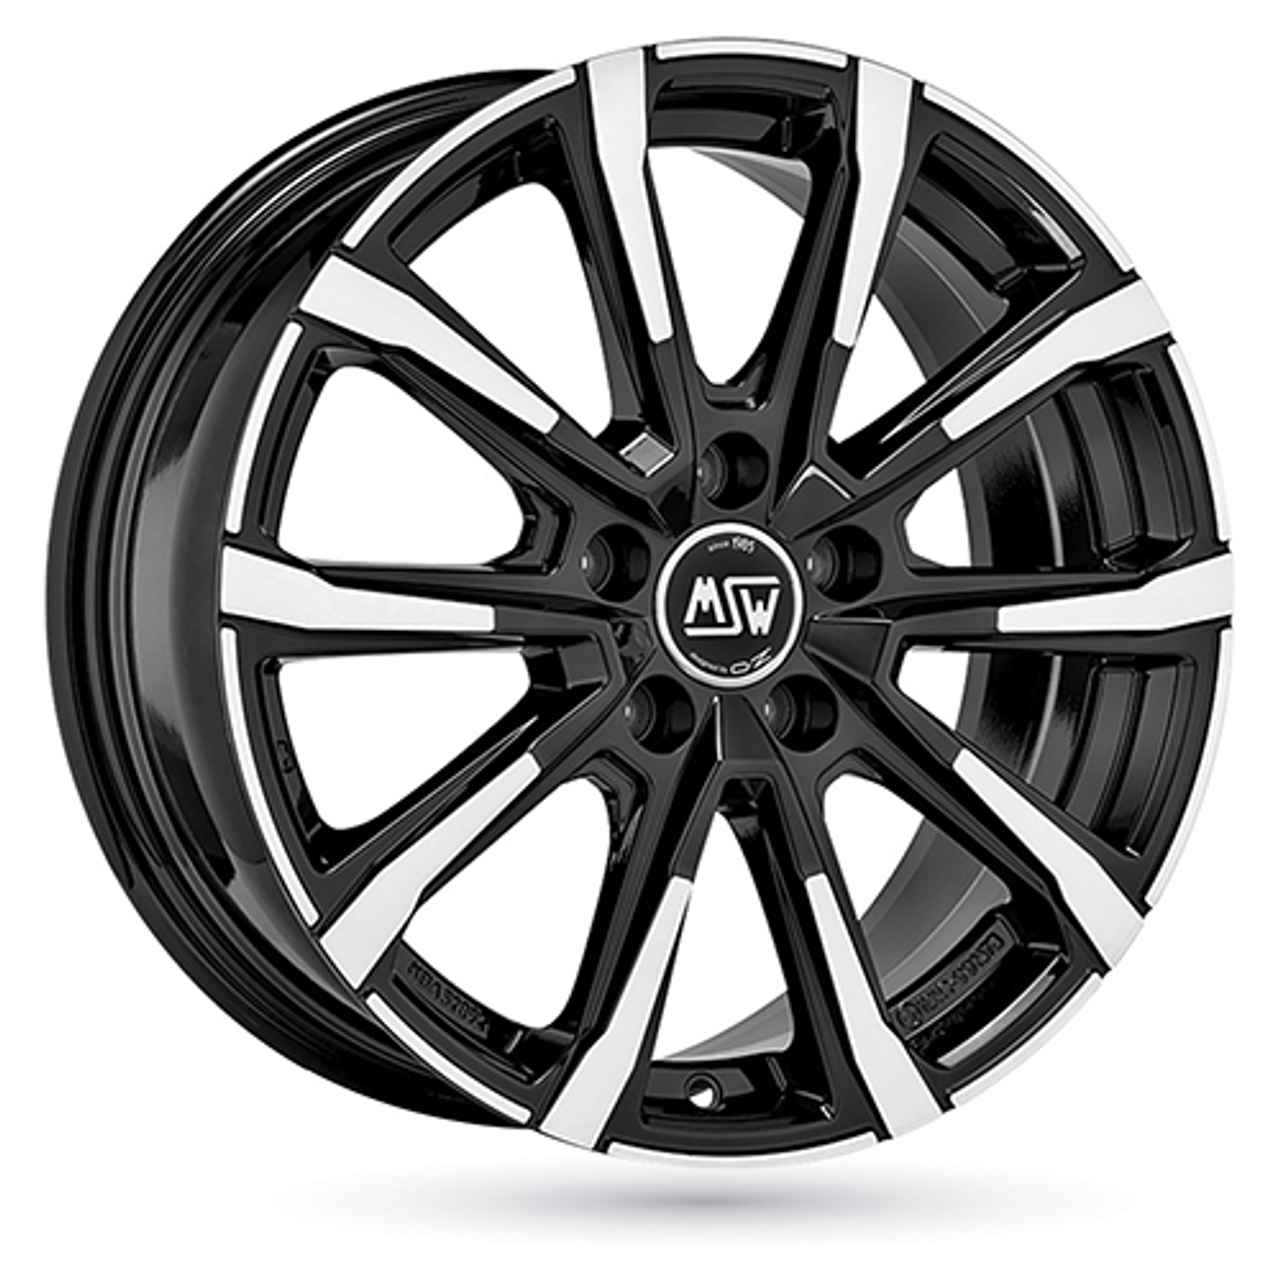 MSW (OZ) MSW 79 gloss black full polished 7.0Jx18 5x114.3 ET45